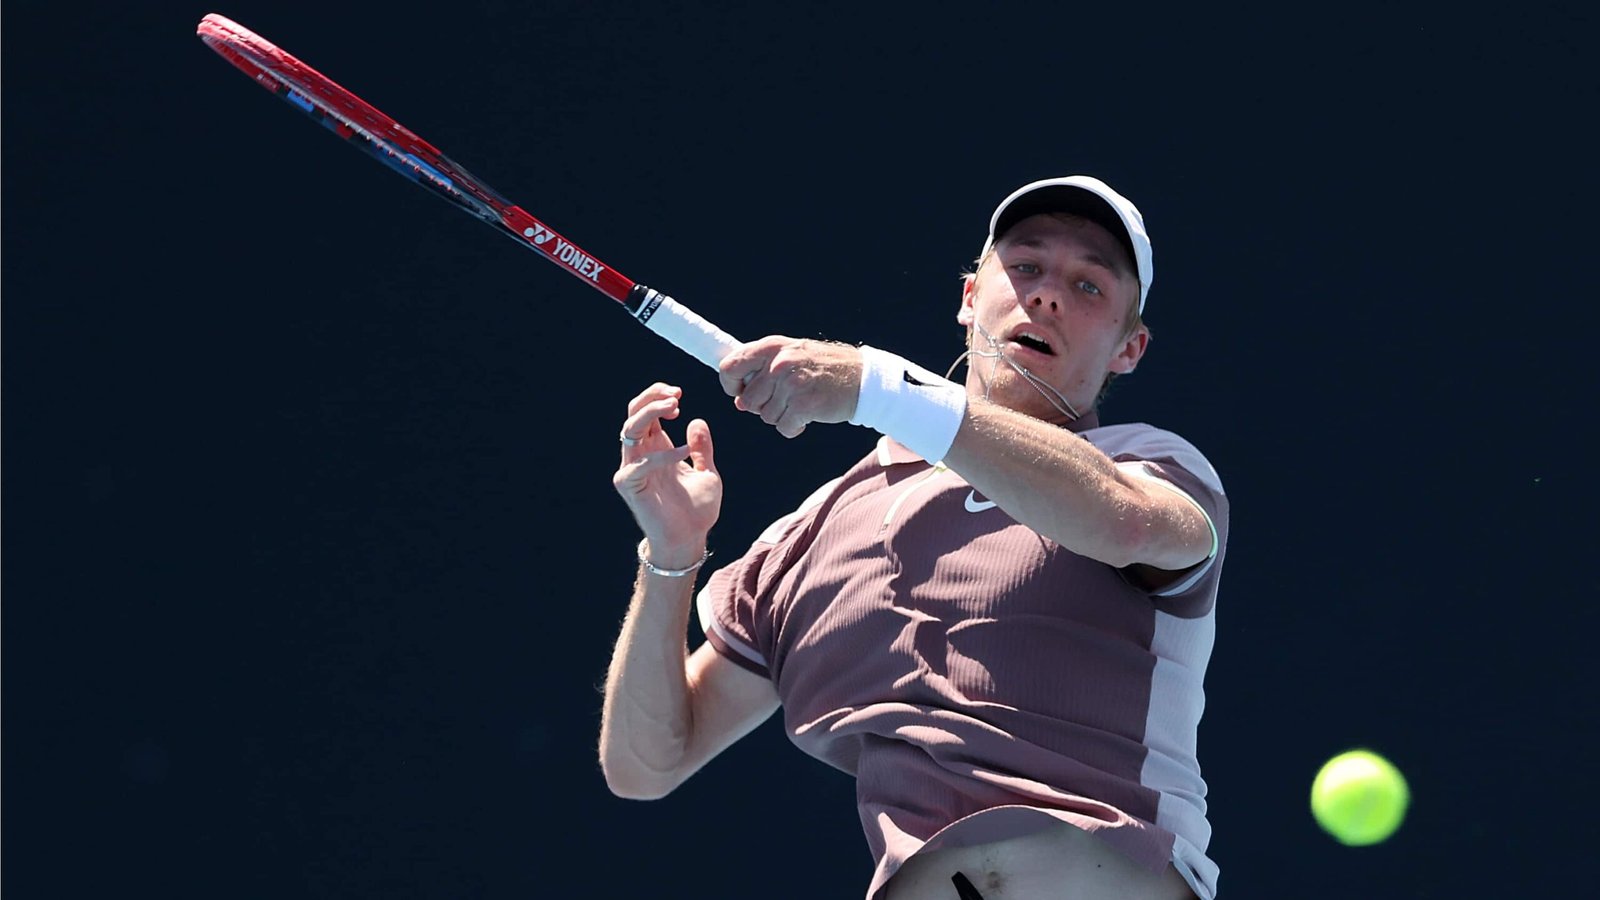 Denis Shapovalov ousted in Open Sud de France Round of 16